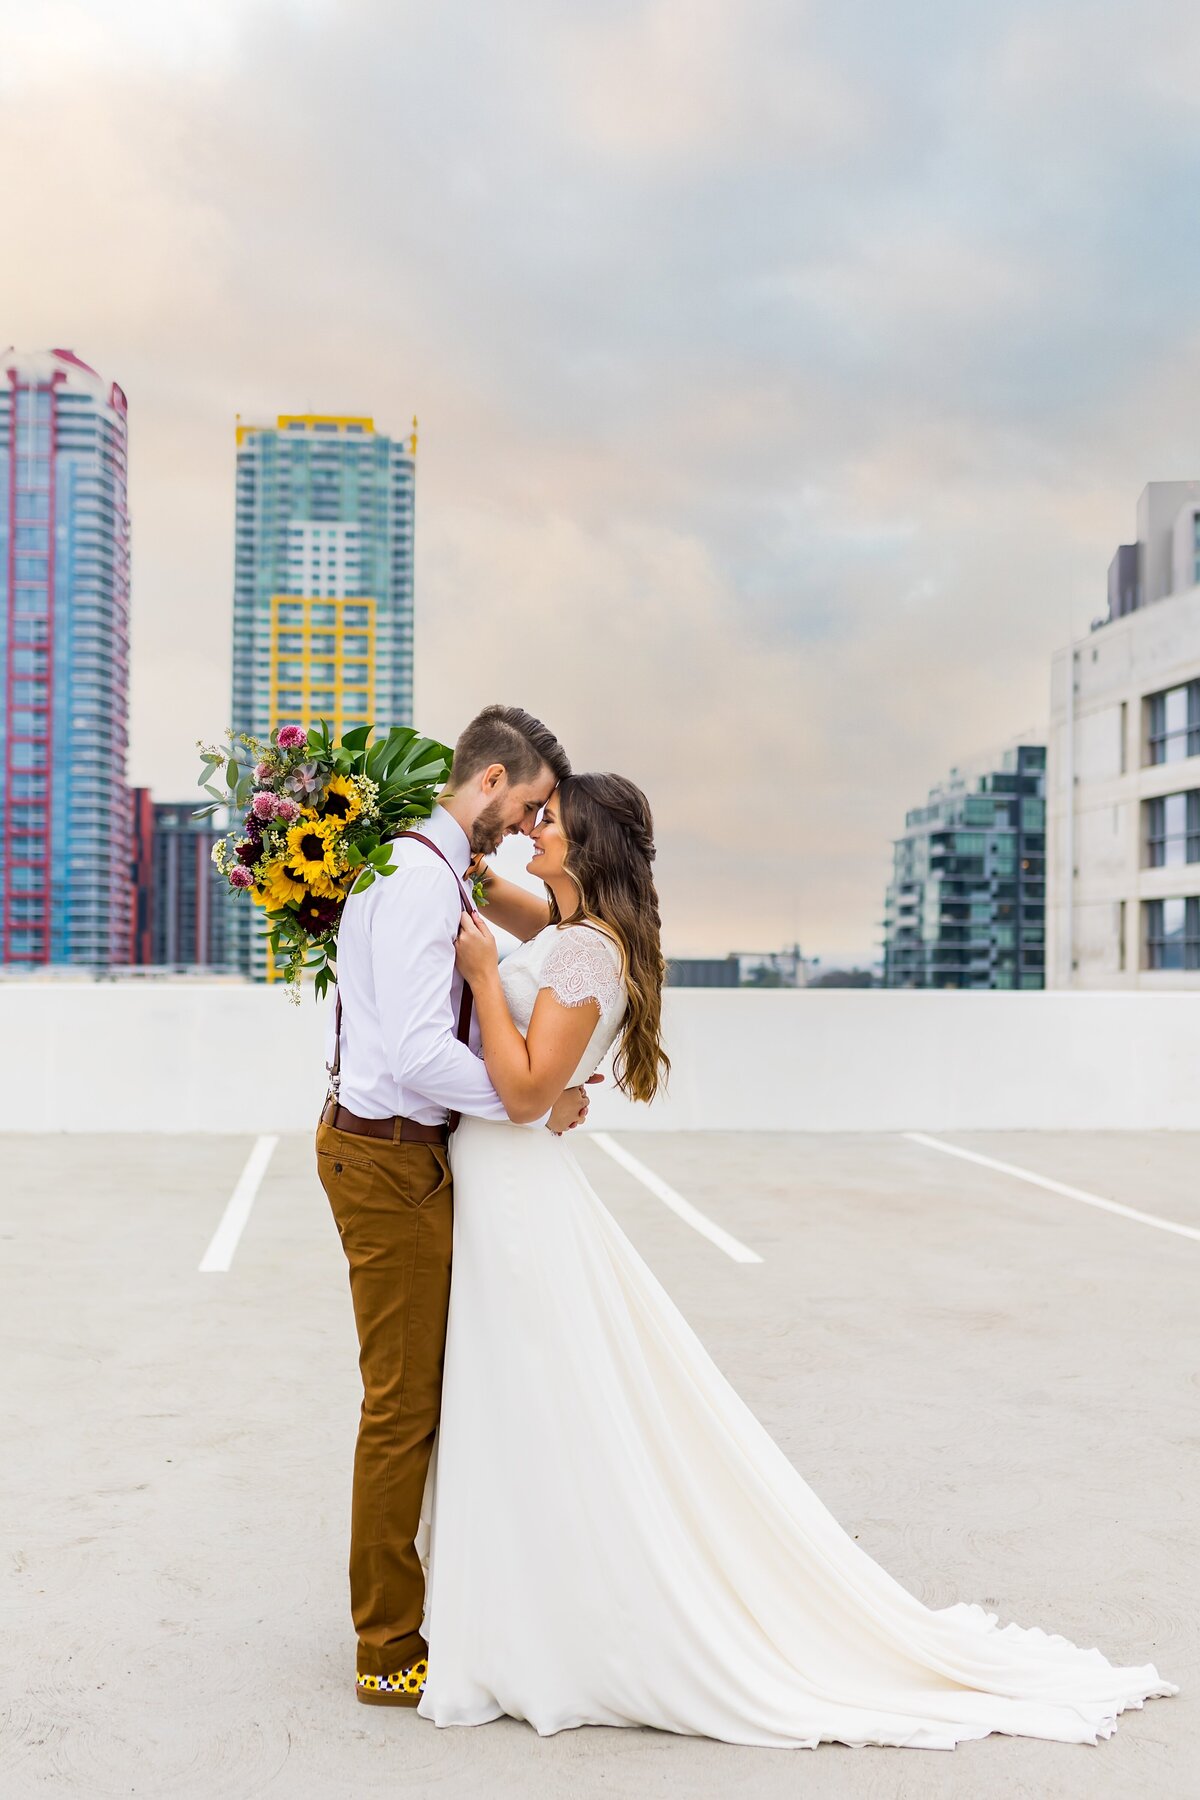 Couple on wedding day in San Diego on rooftop